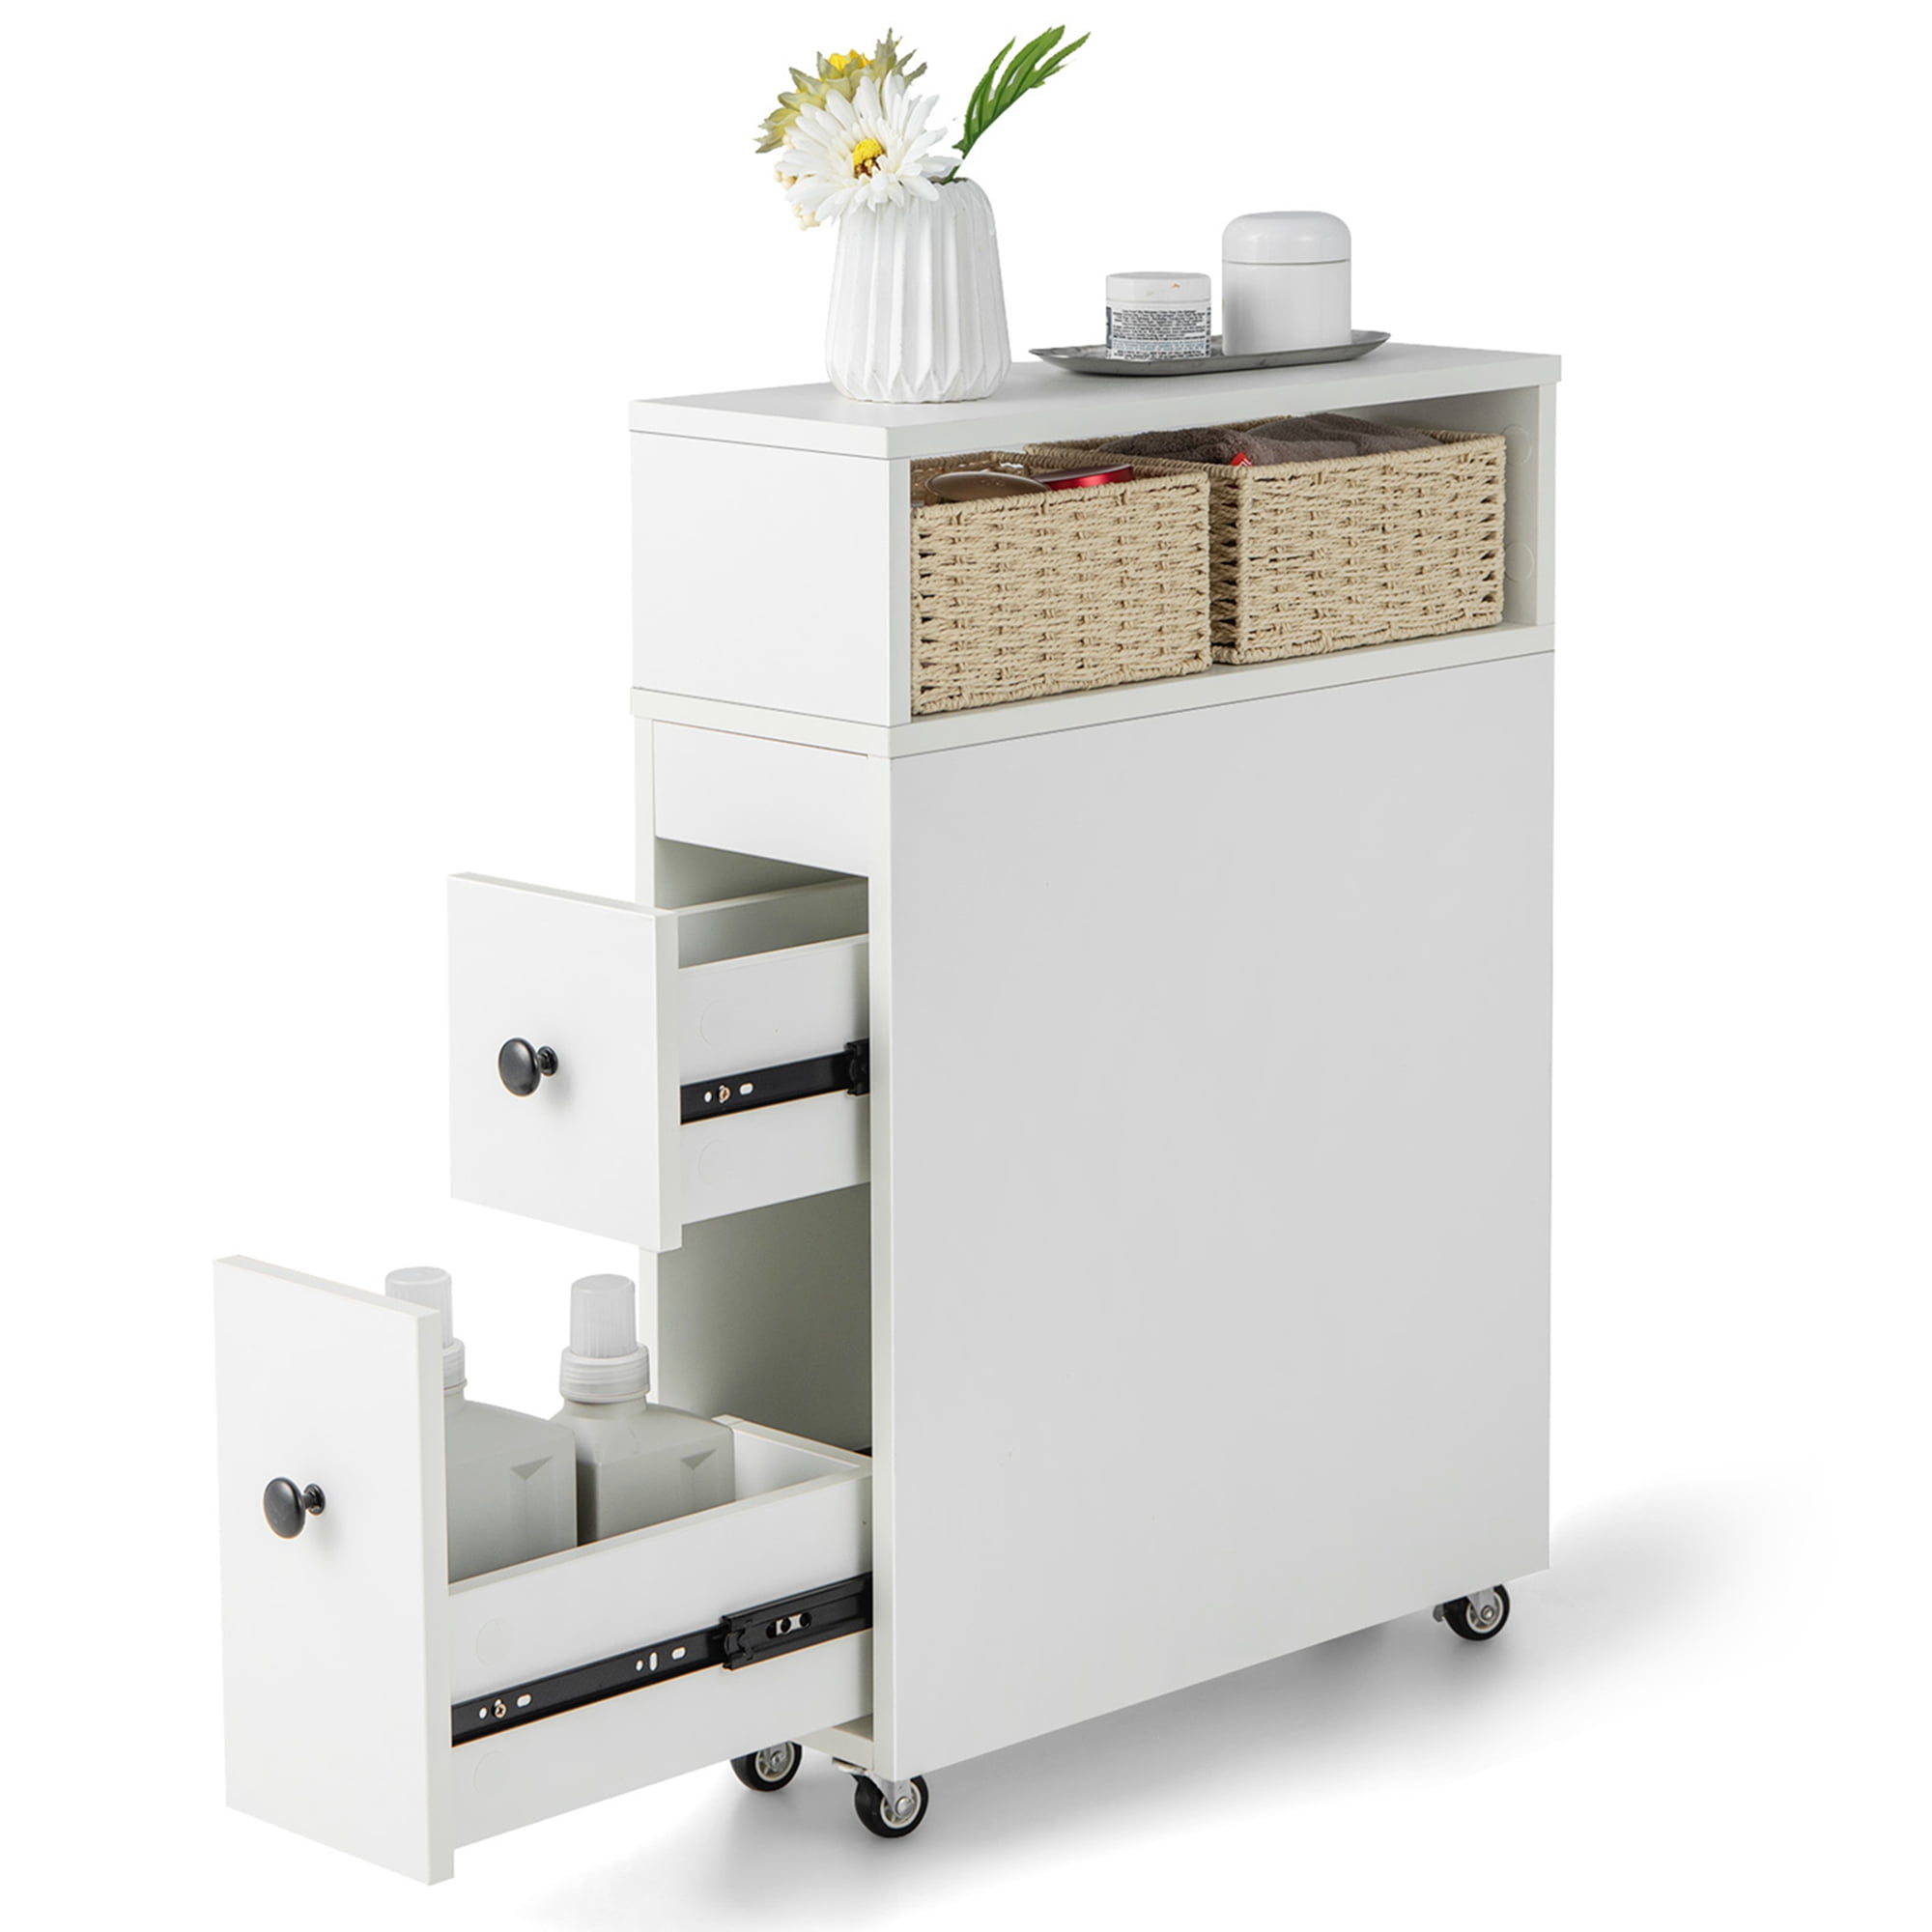 Movable Crevice Storage Cabinet Drawer Bathroom Organizer Home Office White  for sale online